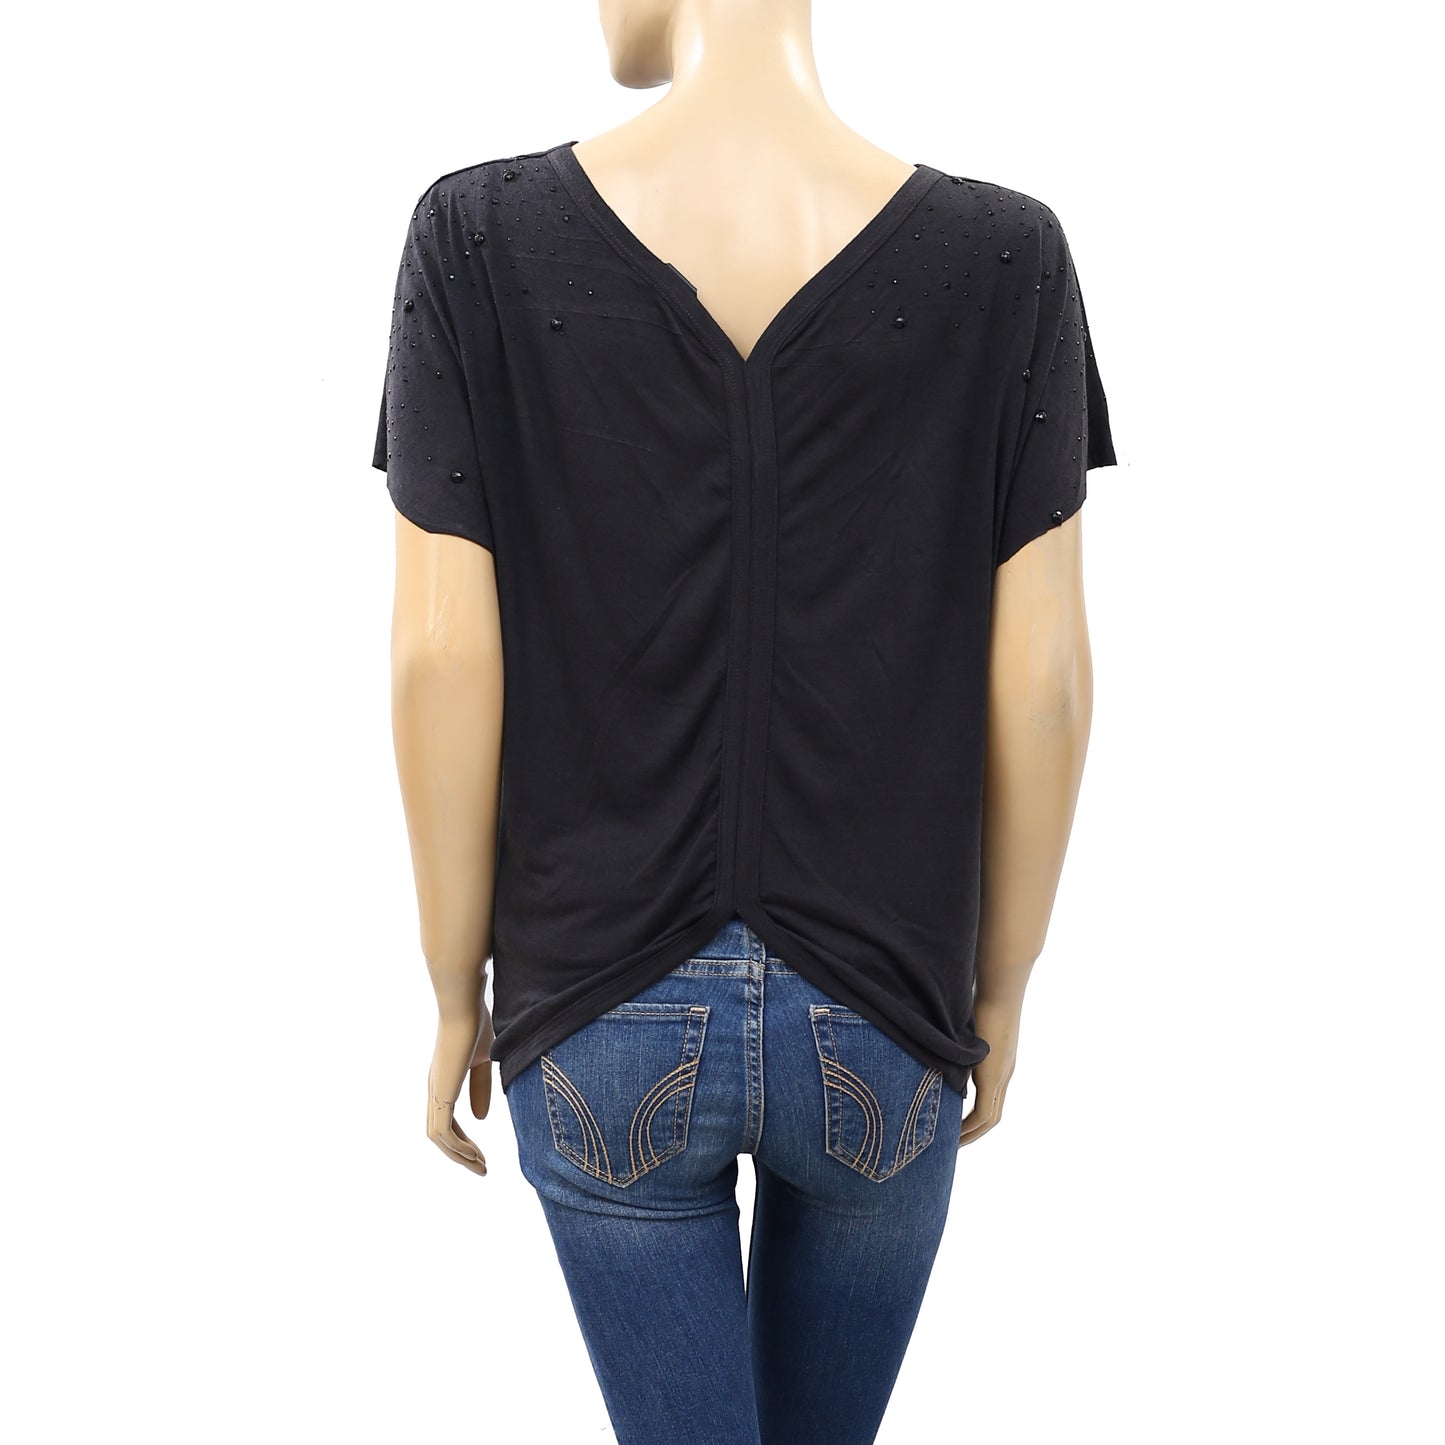 Guess Stone Beaded Embellished Blouse Top